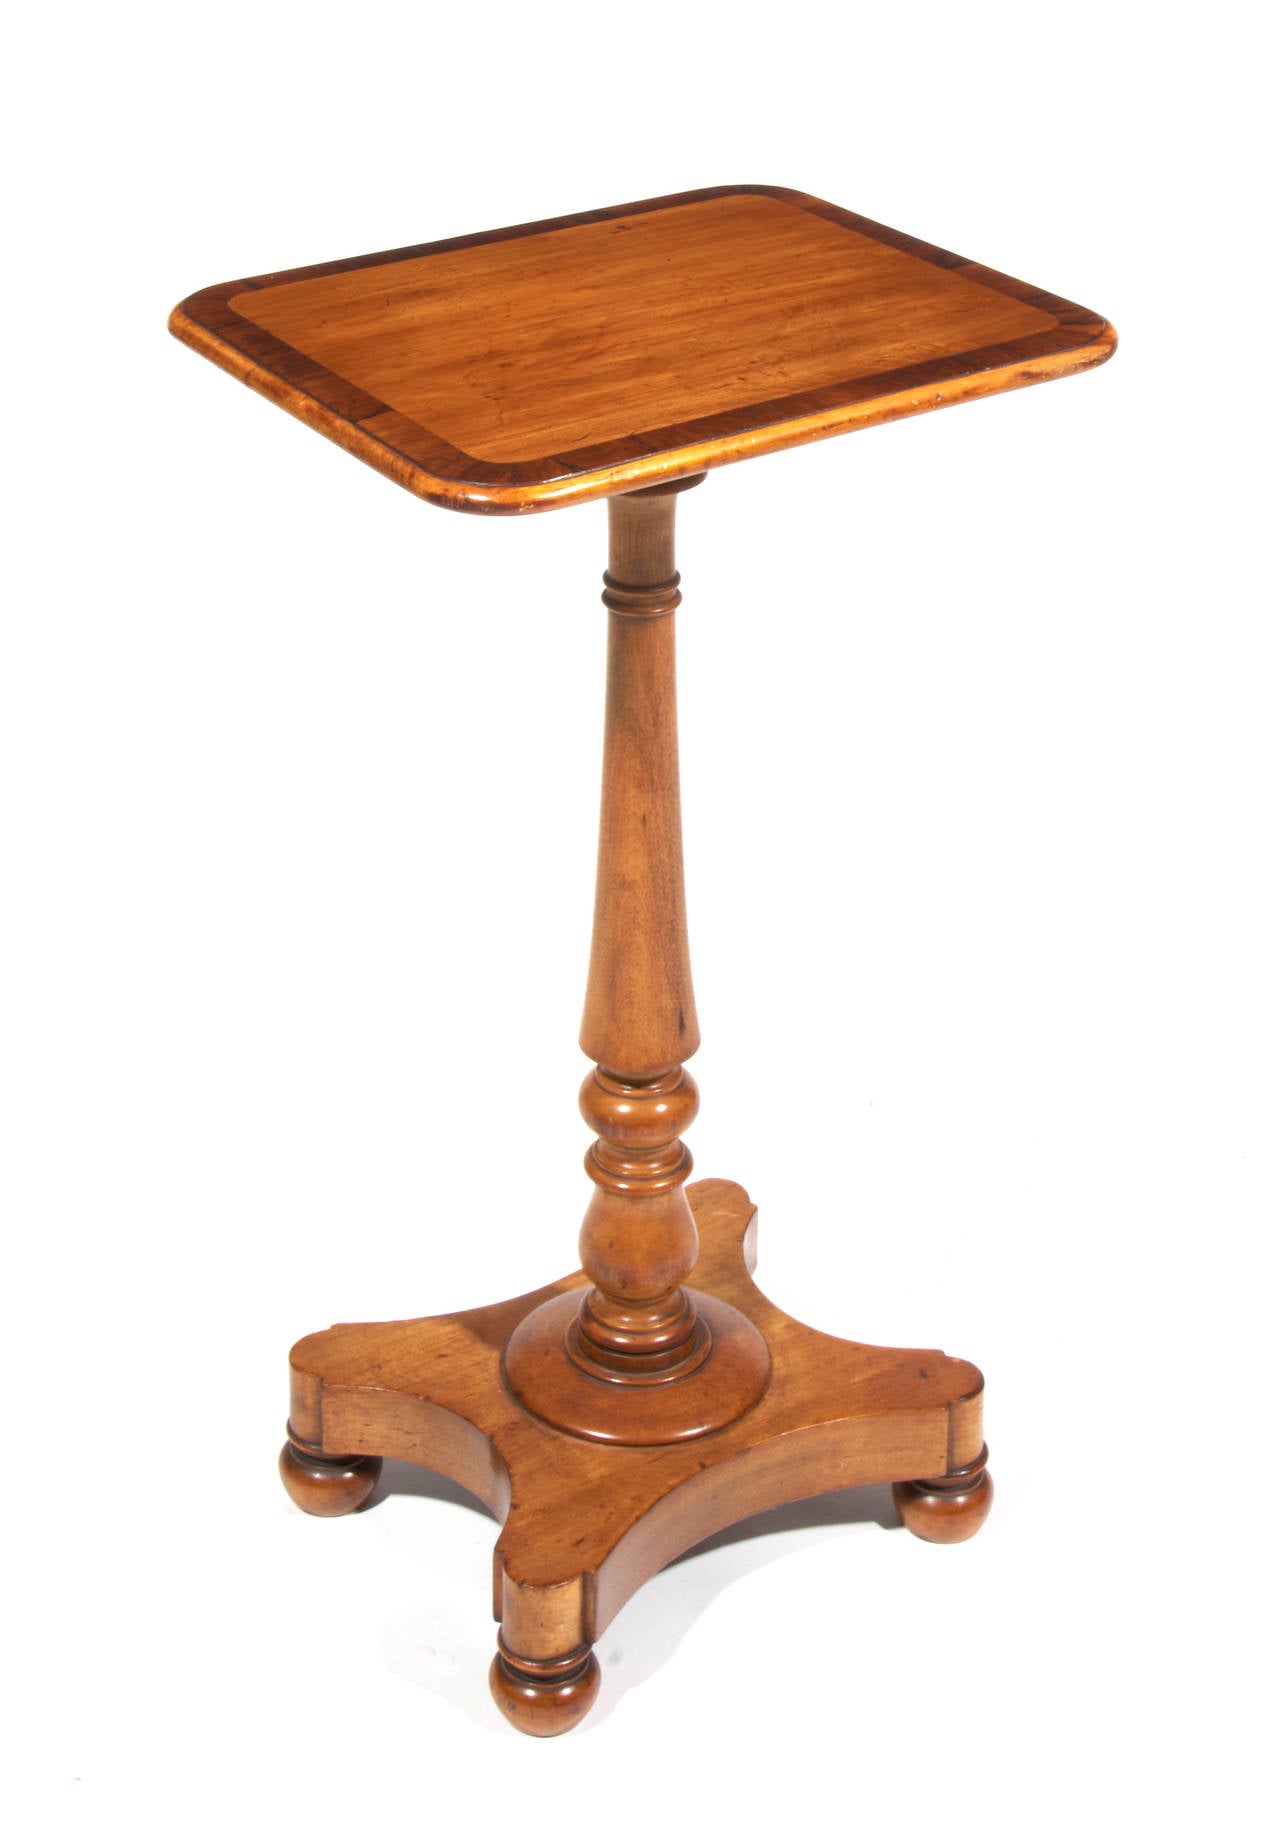 Early 19th Century Satinwood Occasional table with Inlaid Edge on Turned Pedestal ending in Bun feet